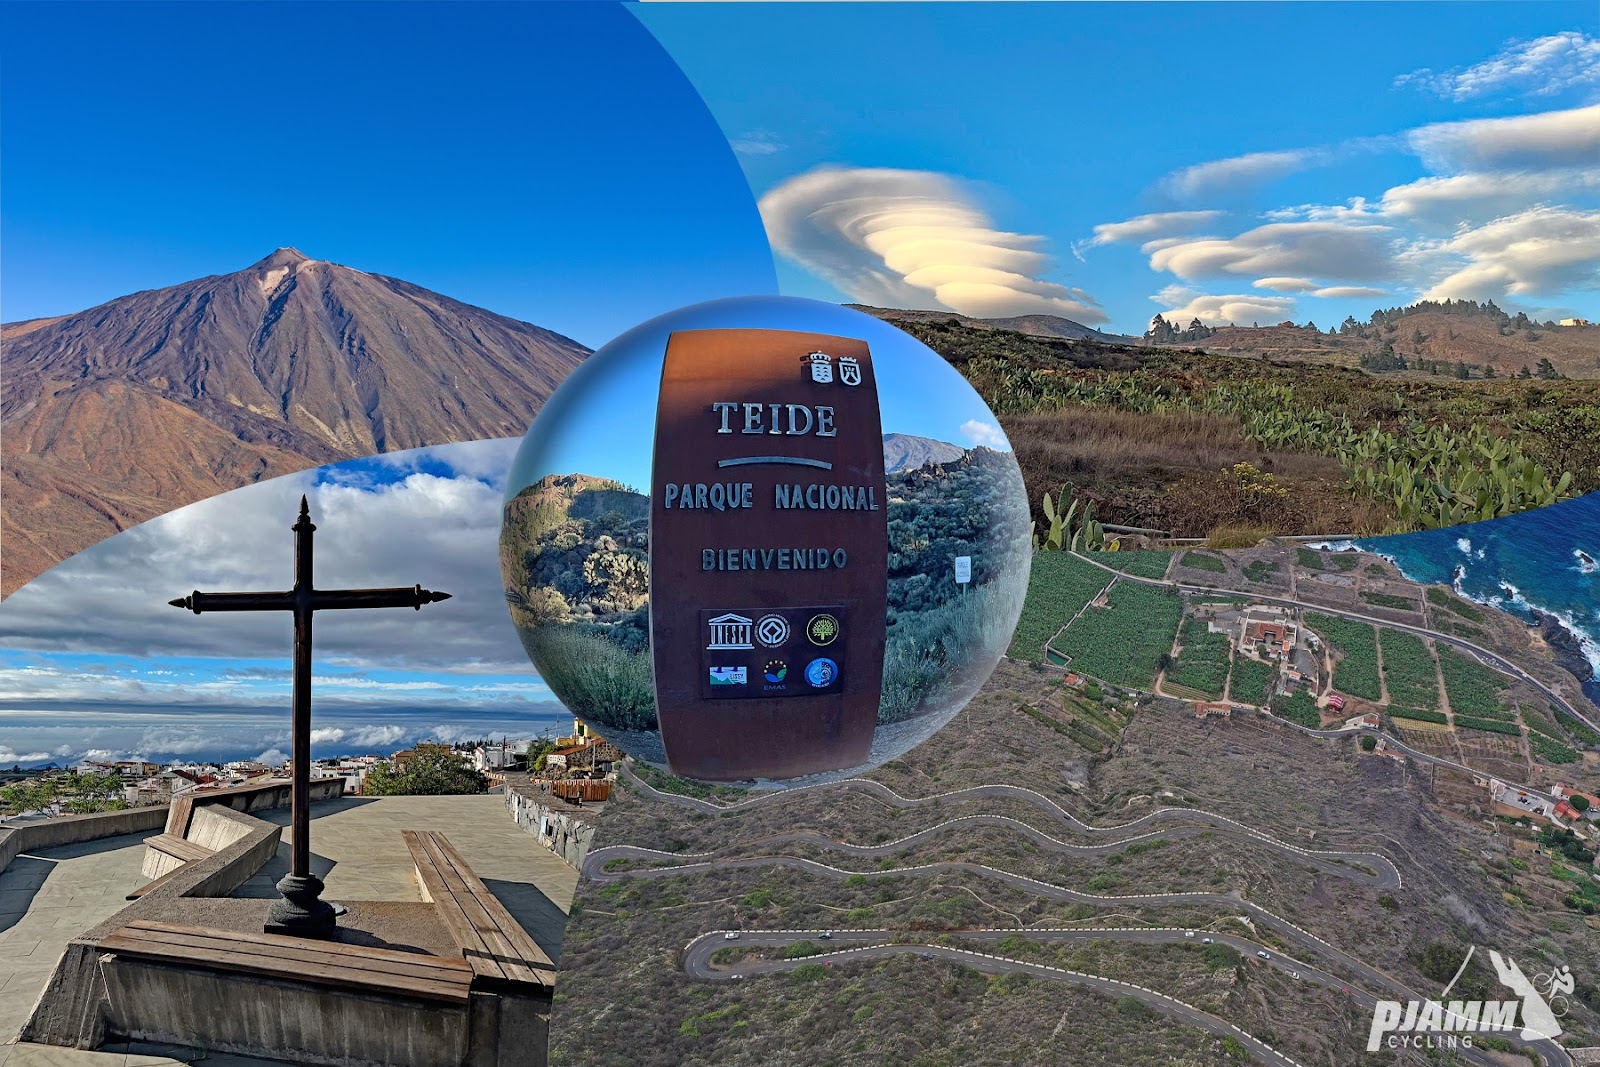 photo collage shows iron cross atop a building, panoramic view showing the road switchbacking up the climb to Mt. Tiede, national park sign for Tiede Parque Nacional